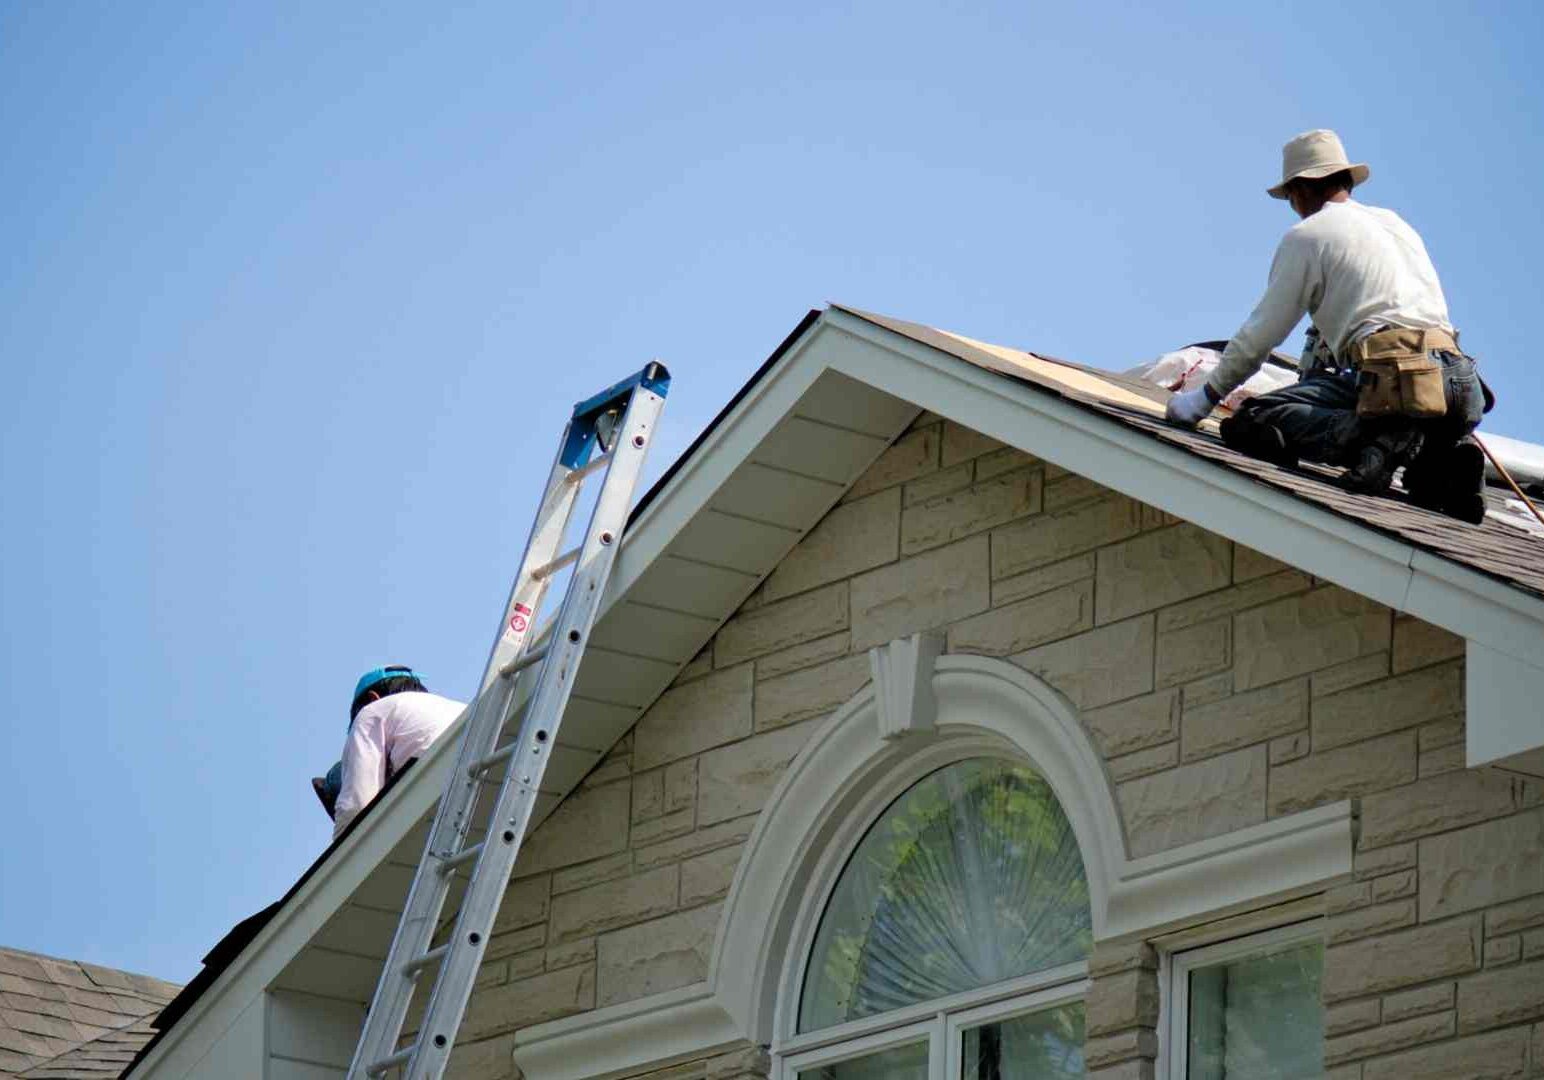 Two men on a ladder working on the roof of a house.